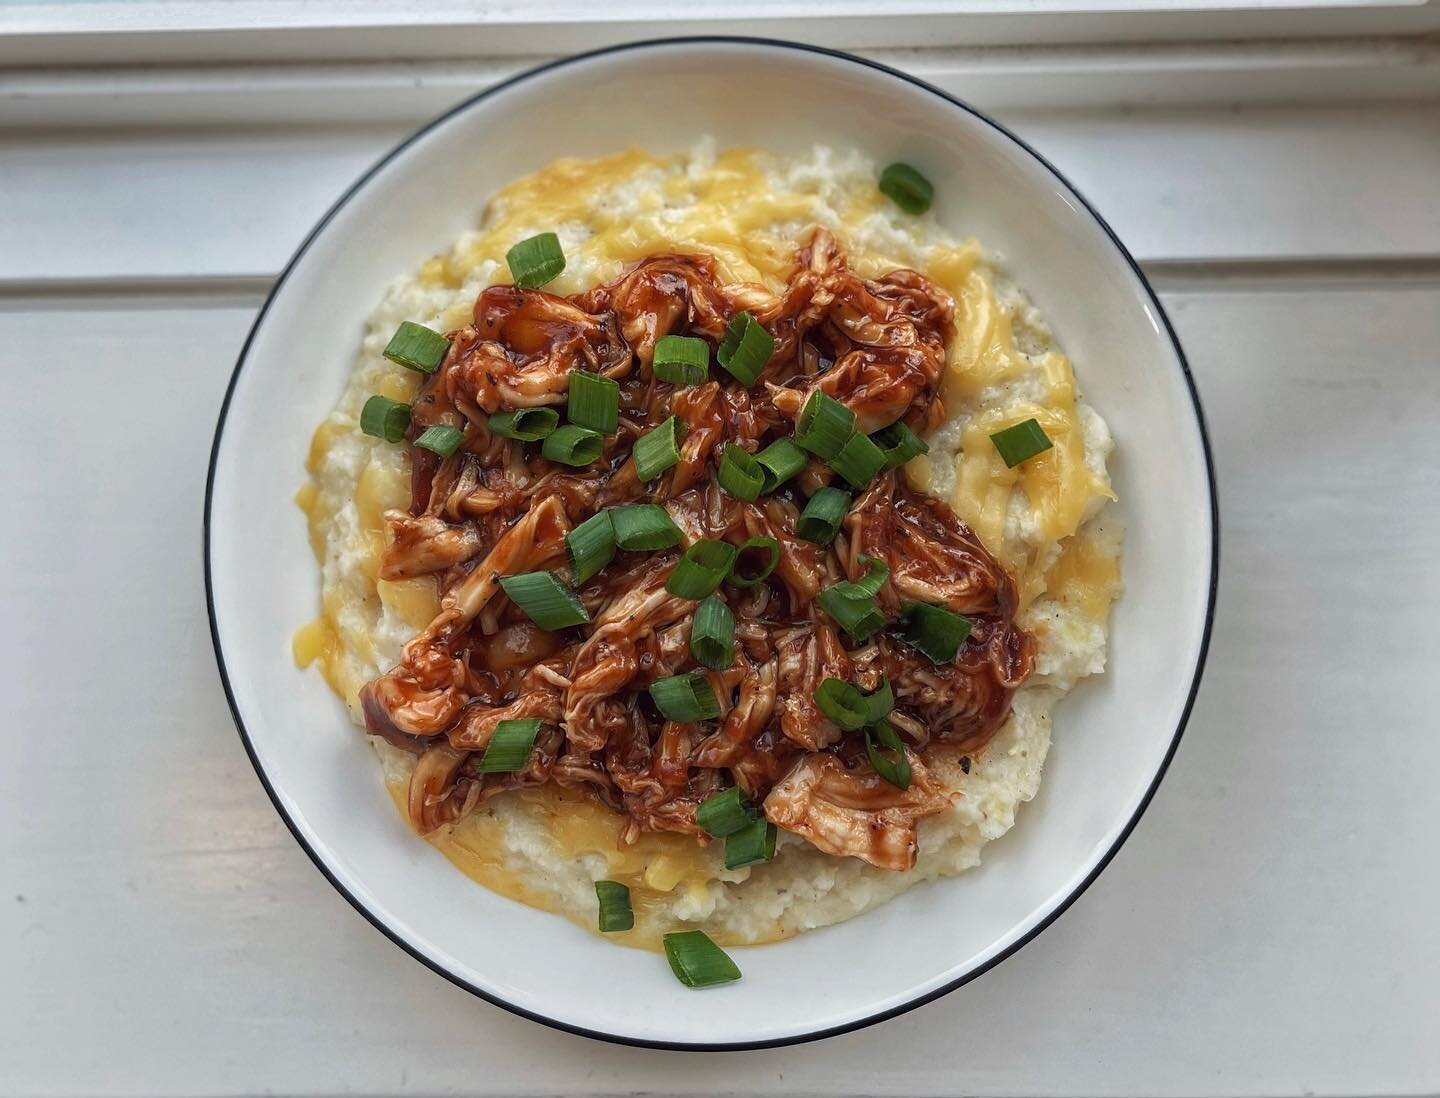 NEW MENU ITEM. 📢 Have you ever had bbq shrimp and grits? It&rsquo;s like that&rsquo;s but better. BBQ glazed shredded chicken over Gouda topped  homestyle grits. Come brunch with us. 💃🏼💃🏼💃🏼